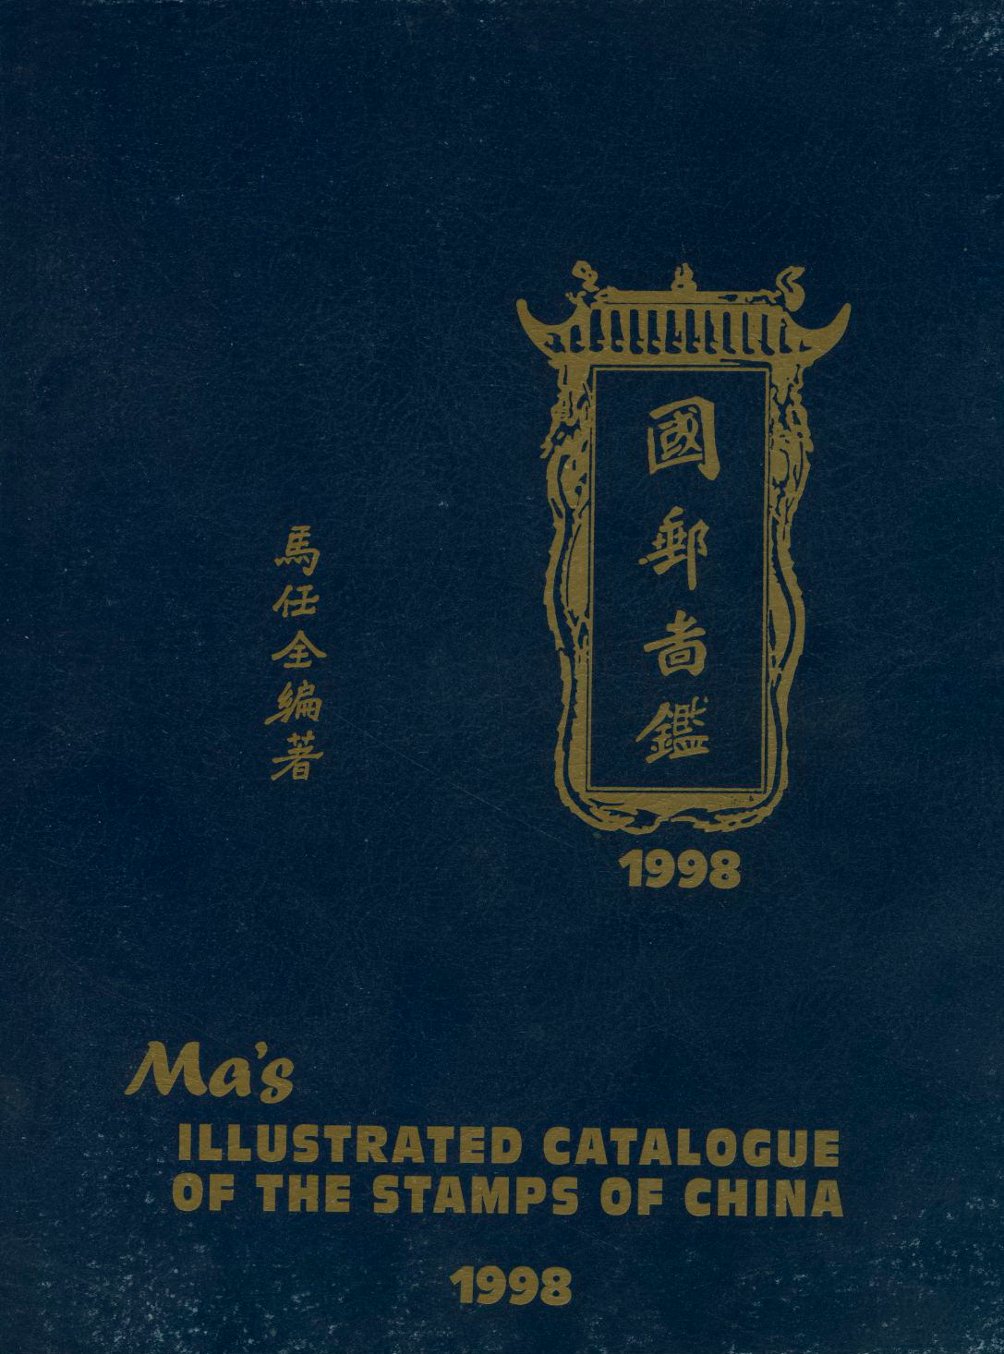 Ma's Illustrated Catalog of the Stamps of China, 1998, some cover wear (3 lb 15 oz)